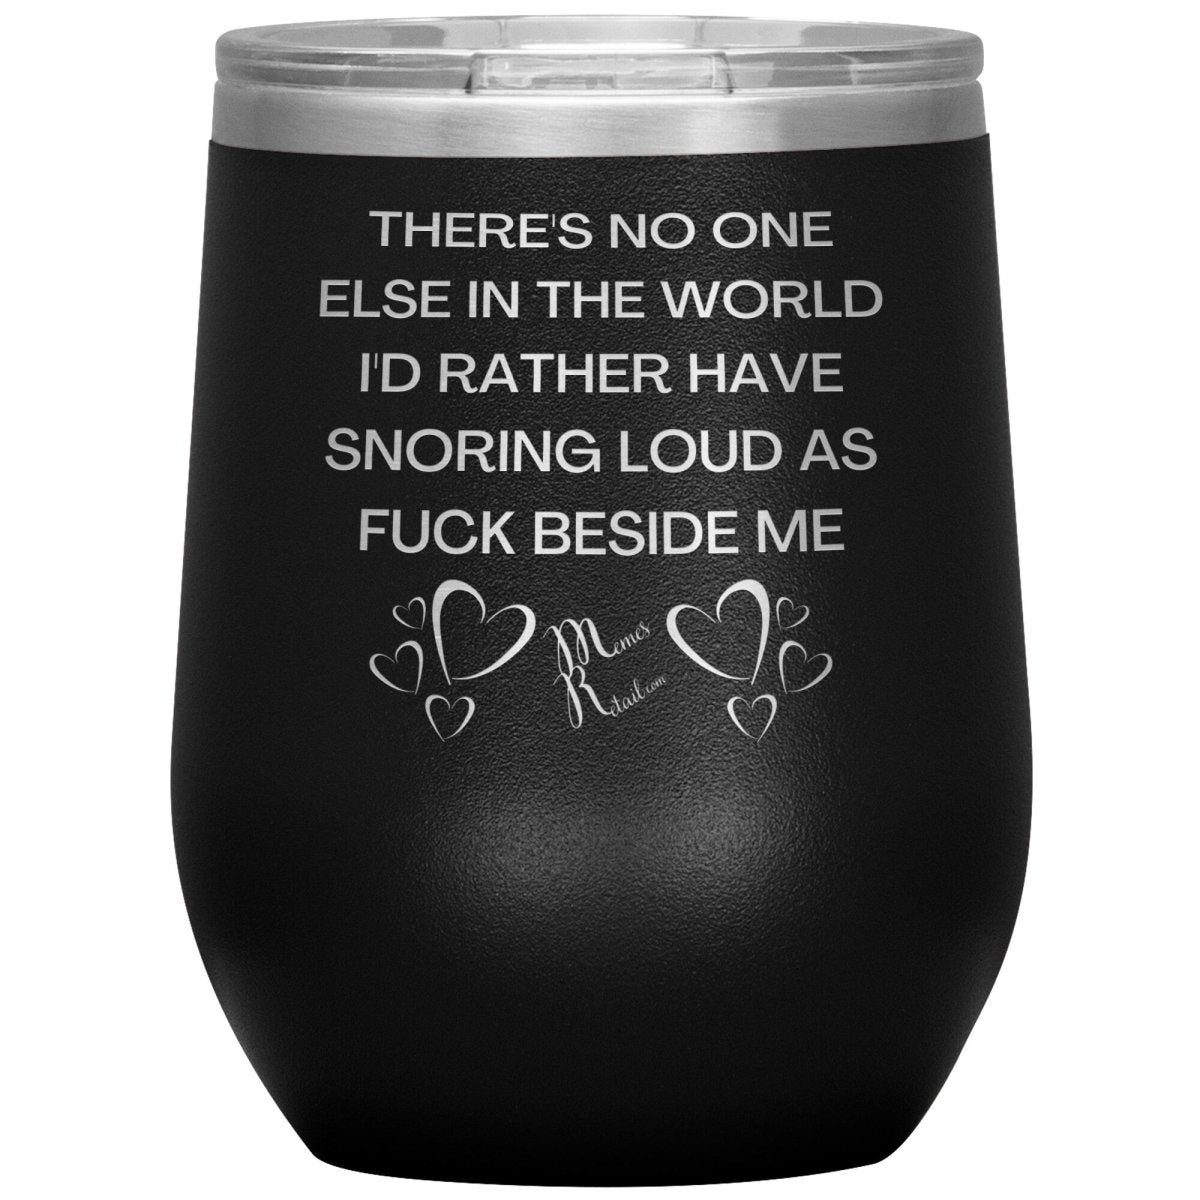 There's No One Else in the World I'd Rather Have Snoring Loud, 12oz Wine Insulated Tumbler / Black - MemesRetail.com